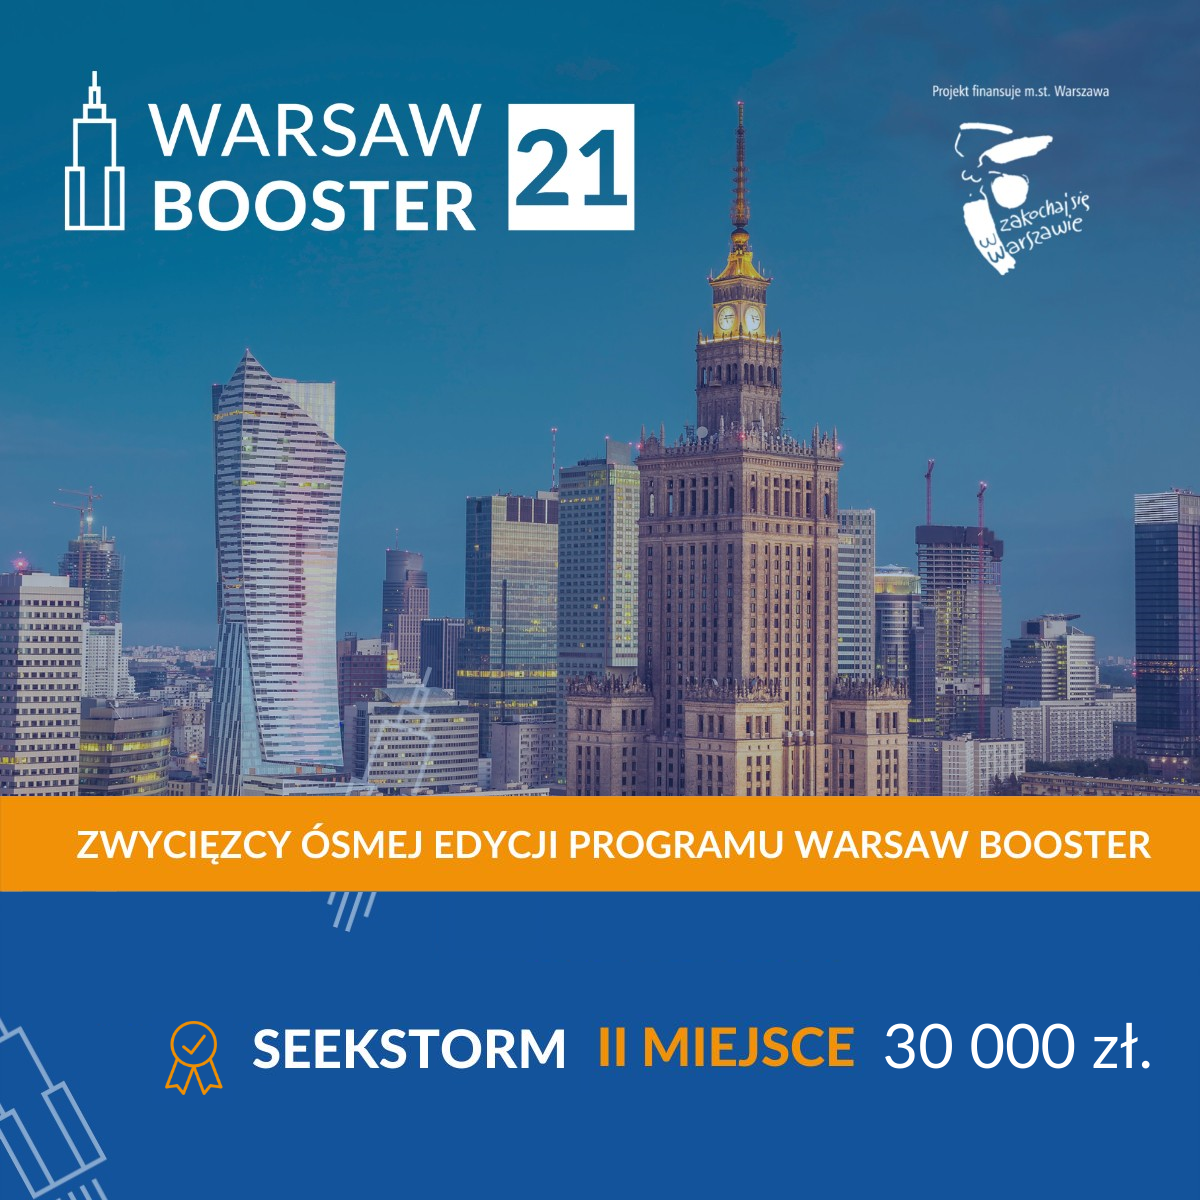 SeekStorm has won the second award in the 'Warsaw Booster 21' accelerator program